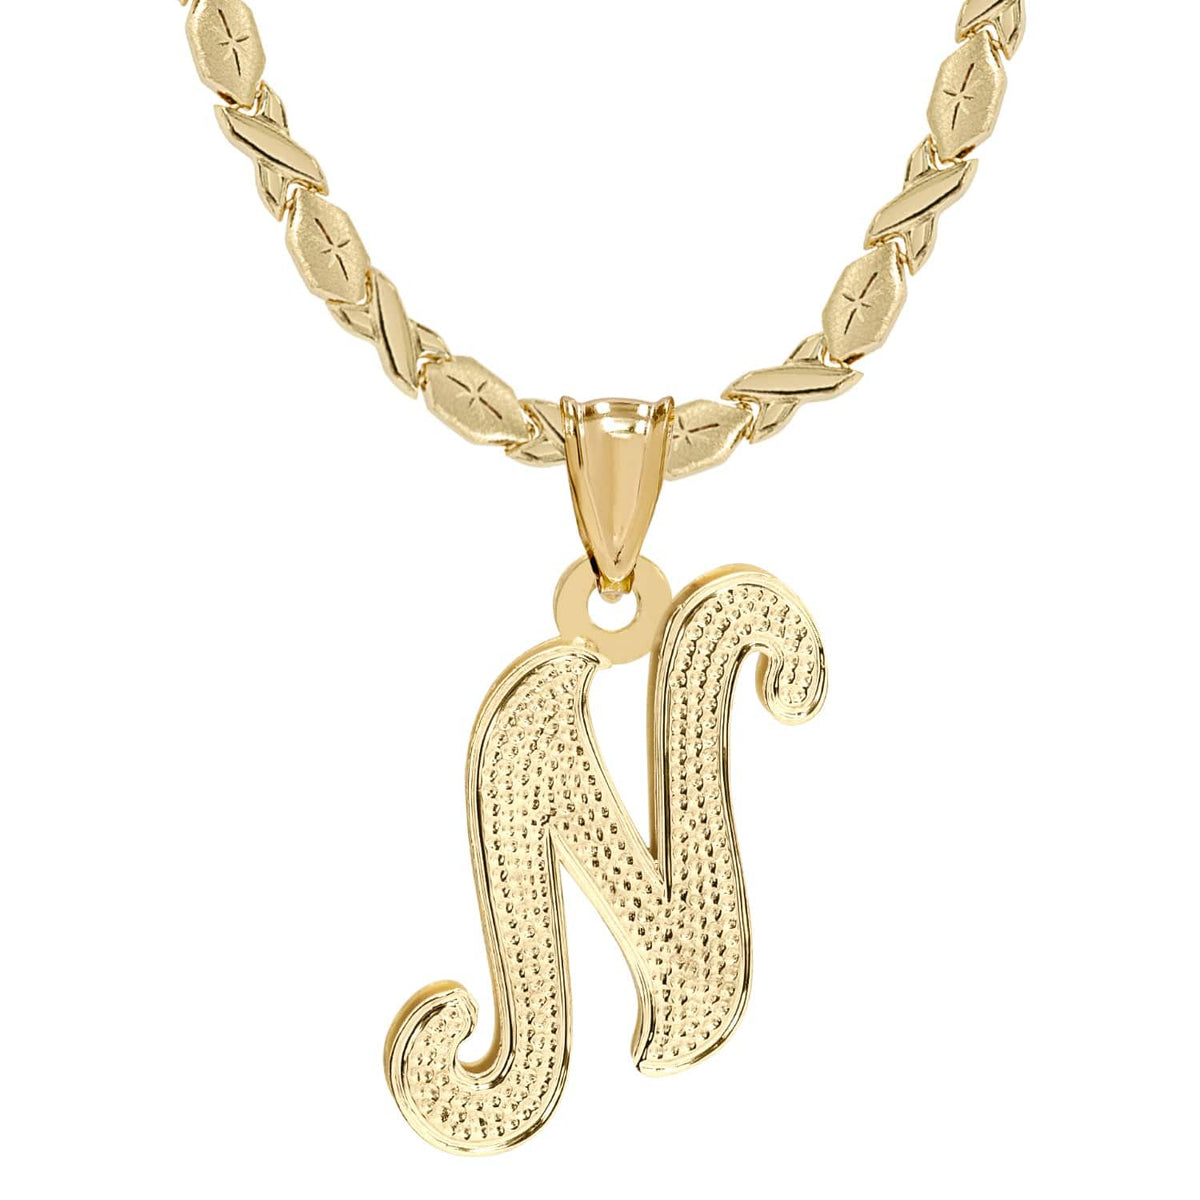 14K Gold over Sterling Silver / Xoxo Chain Initial Necklace - Double Plated with Beaded Finish with Xoxo chain